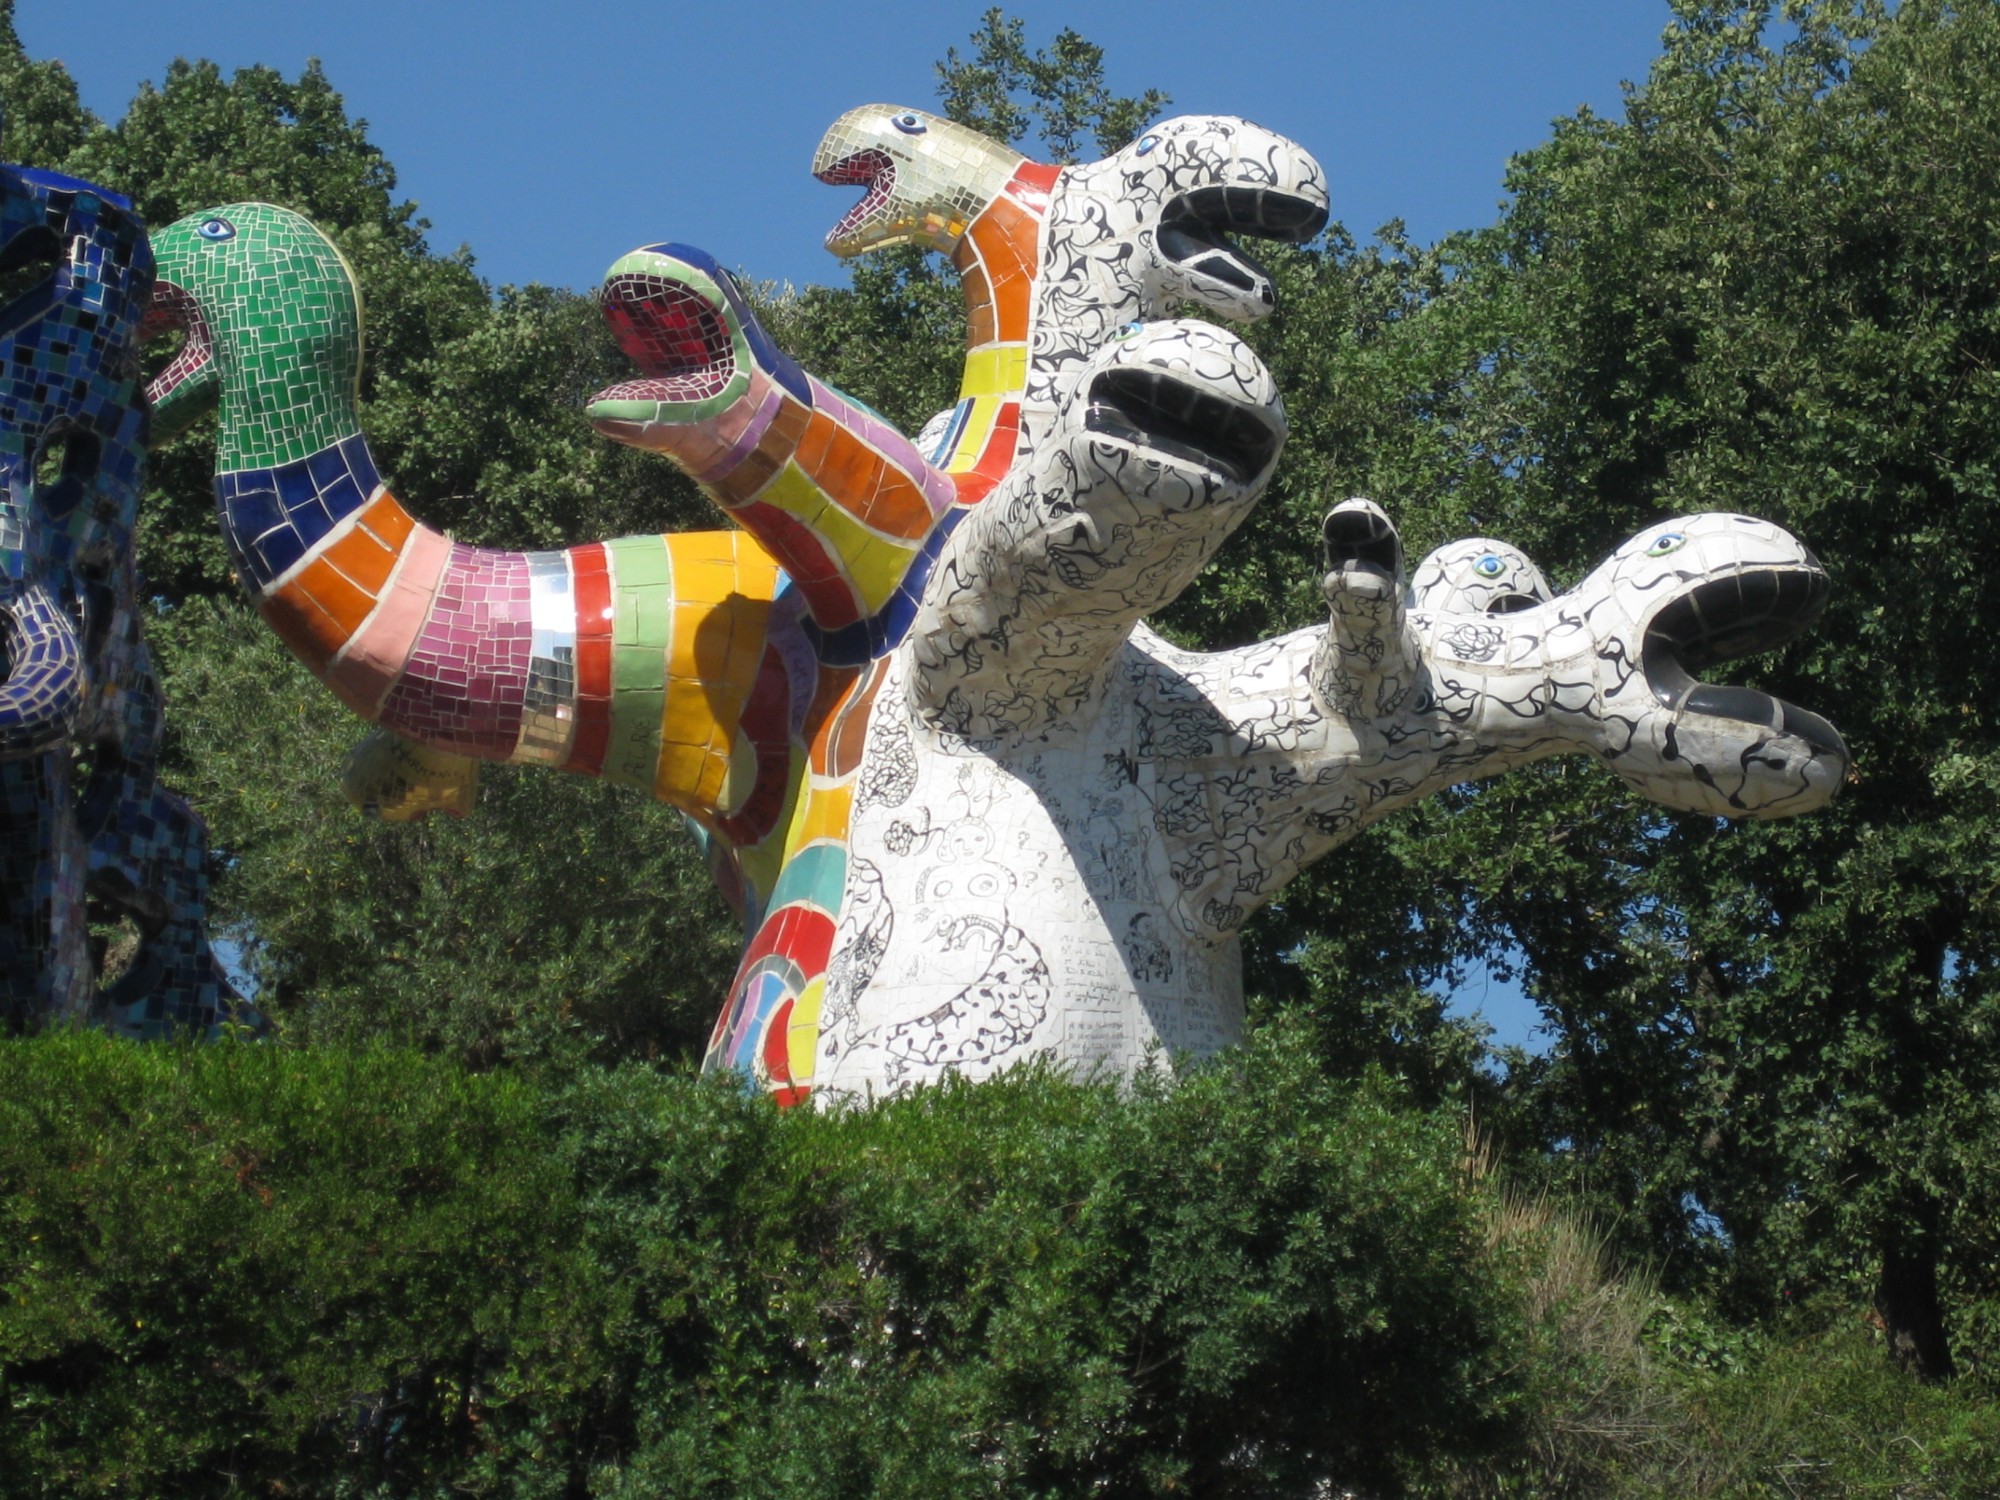 Capalbio Tarot Garden of Niki de Saint Phalle (8) | Tuscany | Pictures in Global-Geography